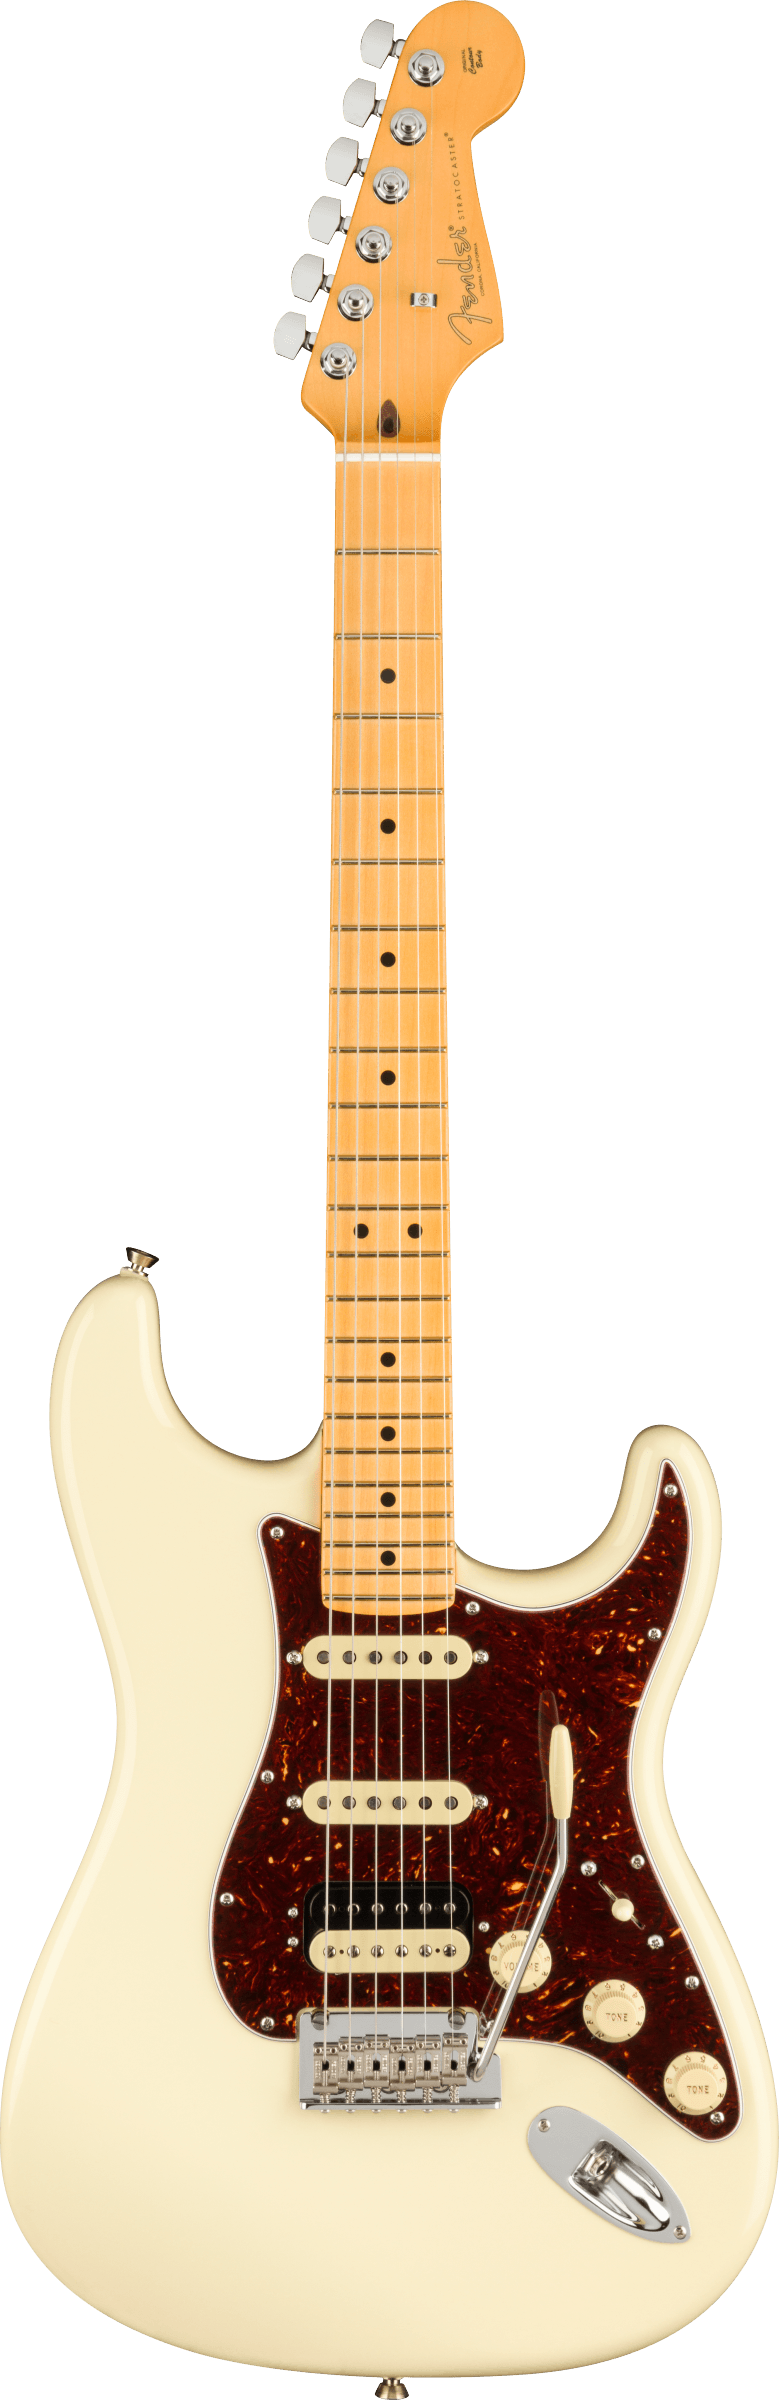 Fender Stratocaster electric guitar in Olympic White Tone Shop Guitars Dallas TX